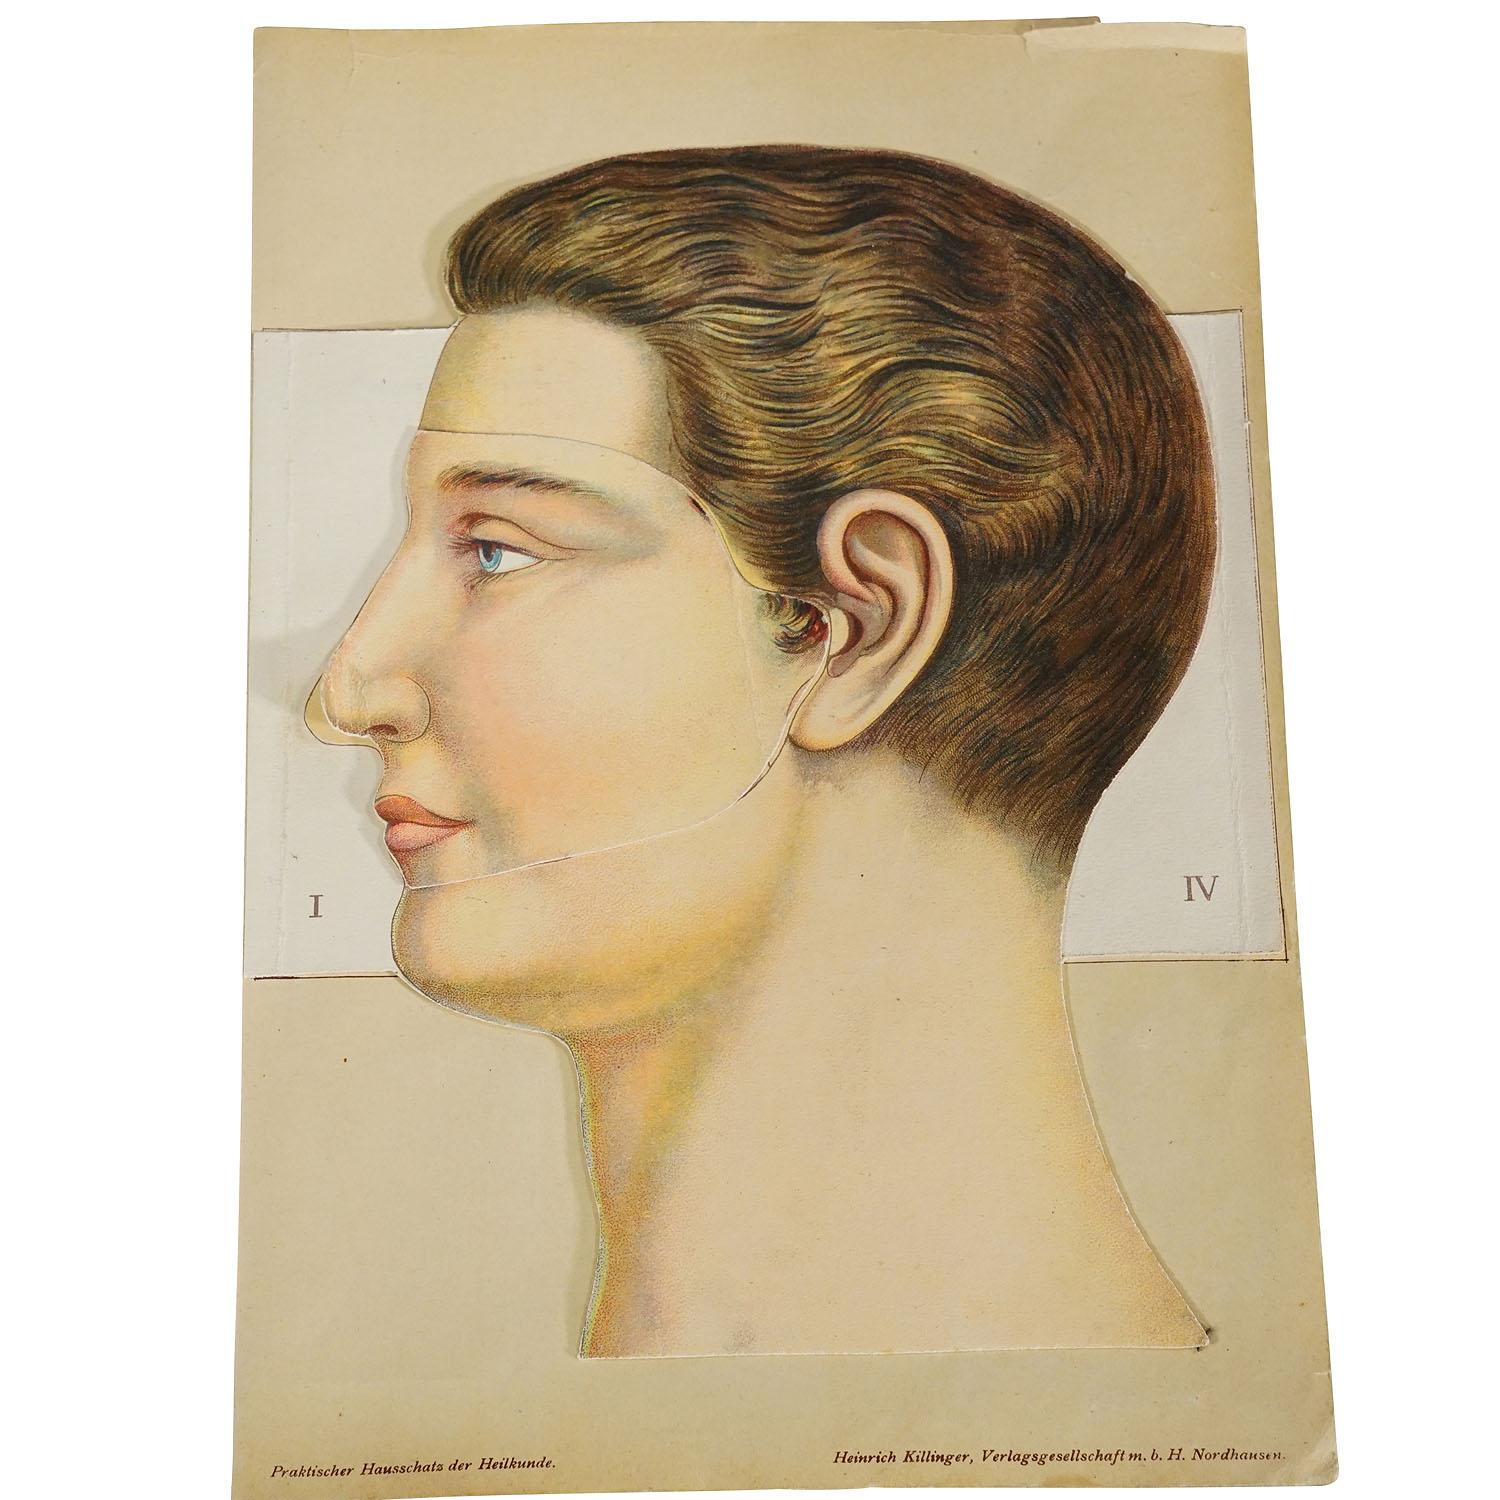 1900s Foldable Anatomical Brochure Depicting the Human Head

A rare brochure illustrating the anatomy of the human head. Very detailed multicoloured depiction of several layers of the head. By folding of the multiple layers the inner structure of